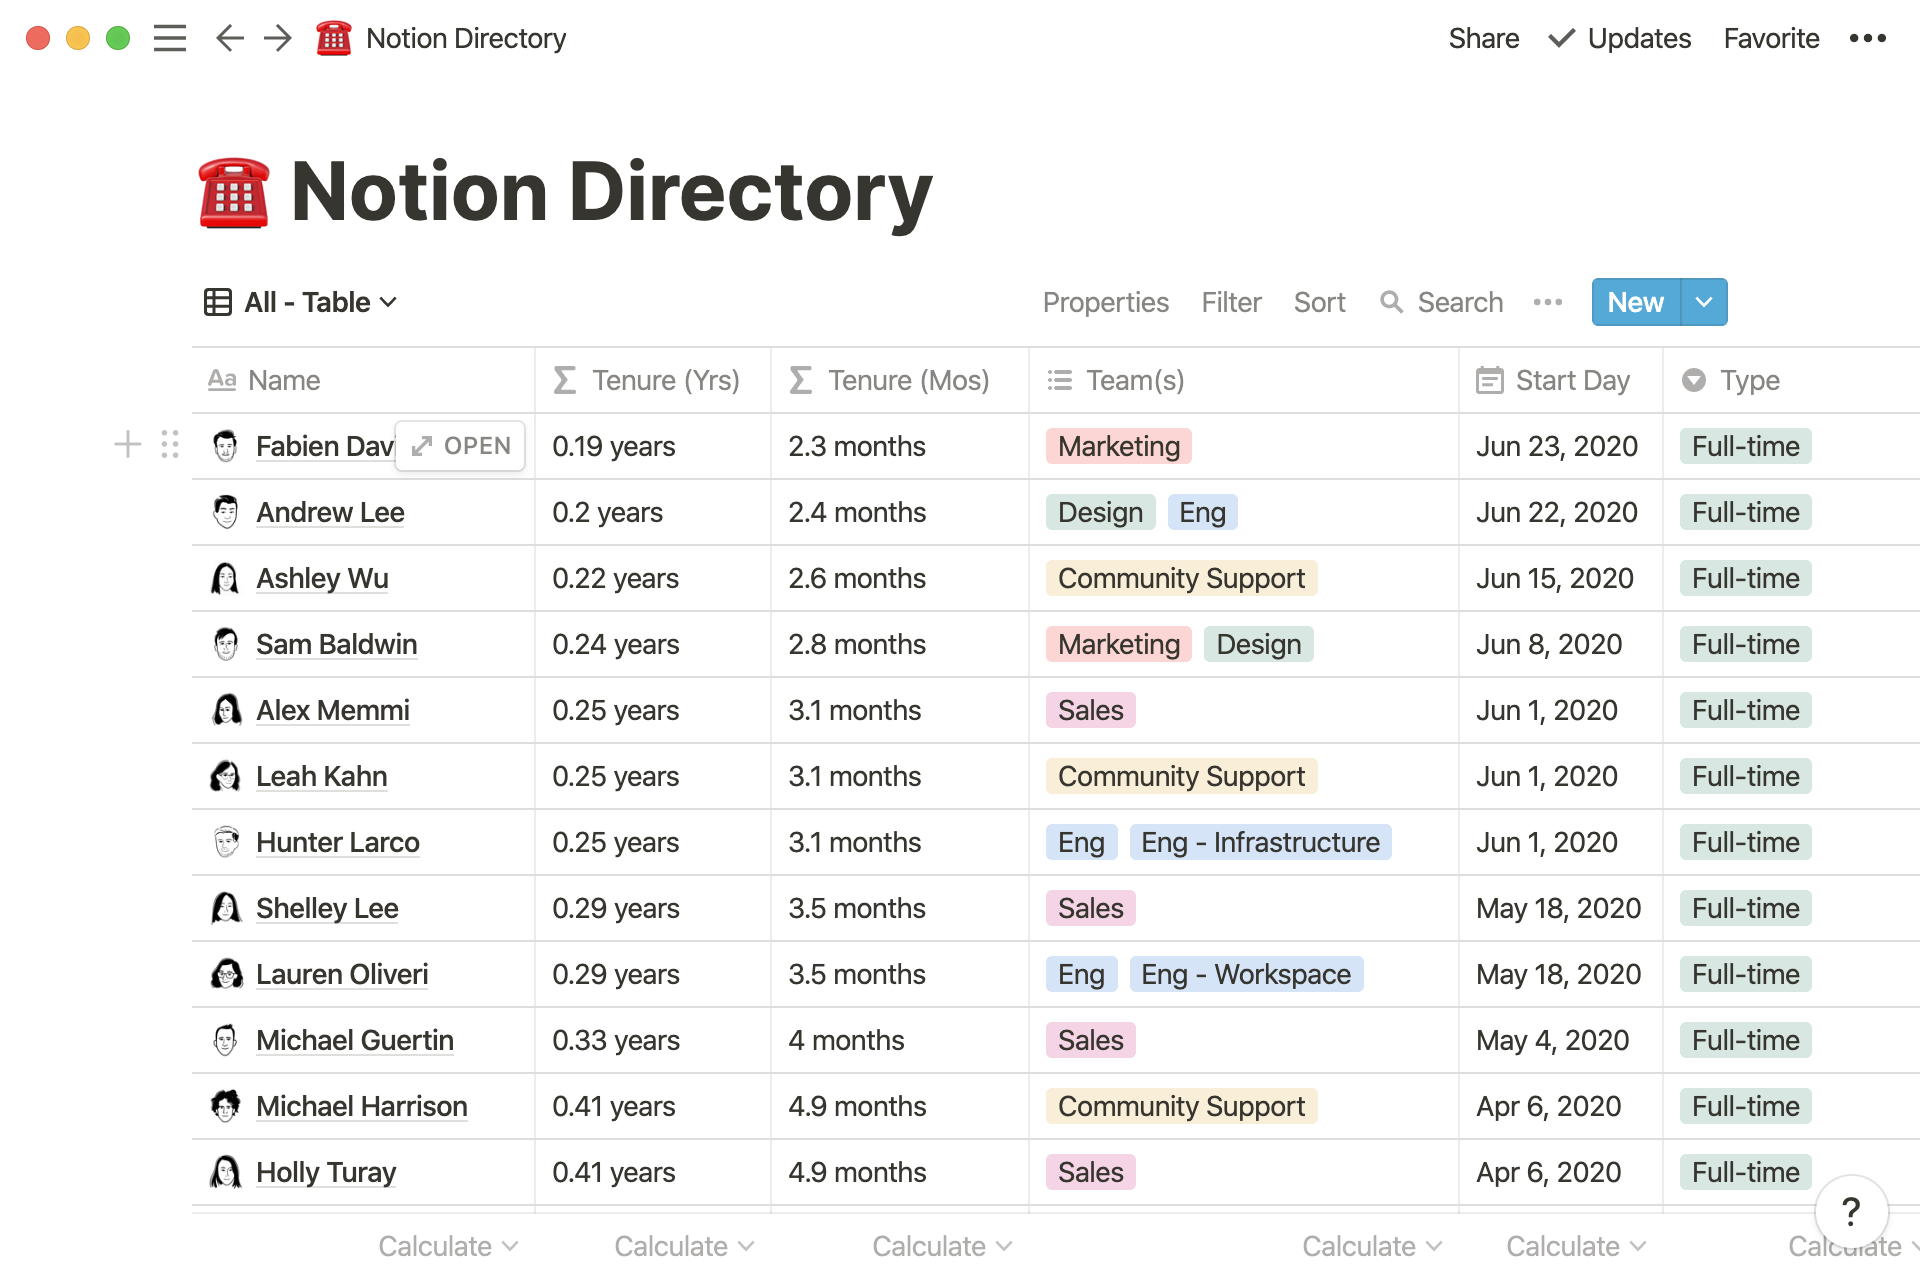 A directory of all Notion employees.